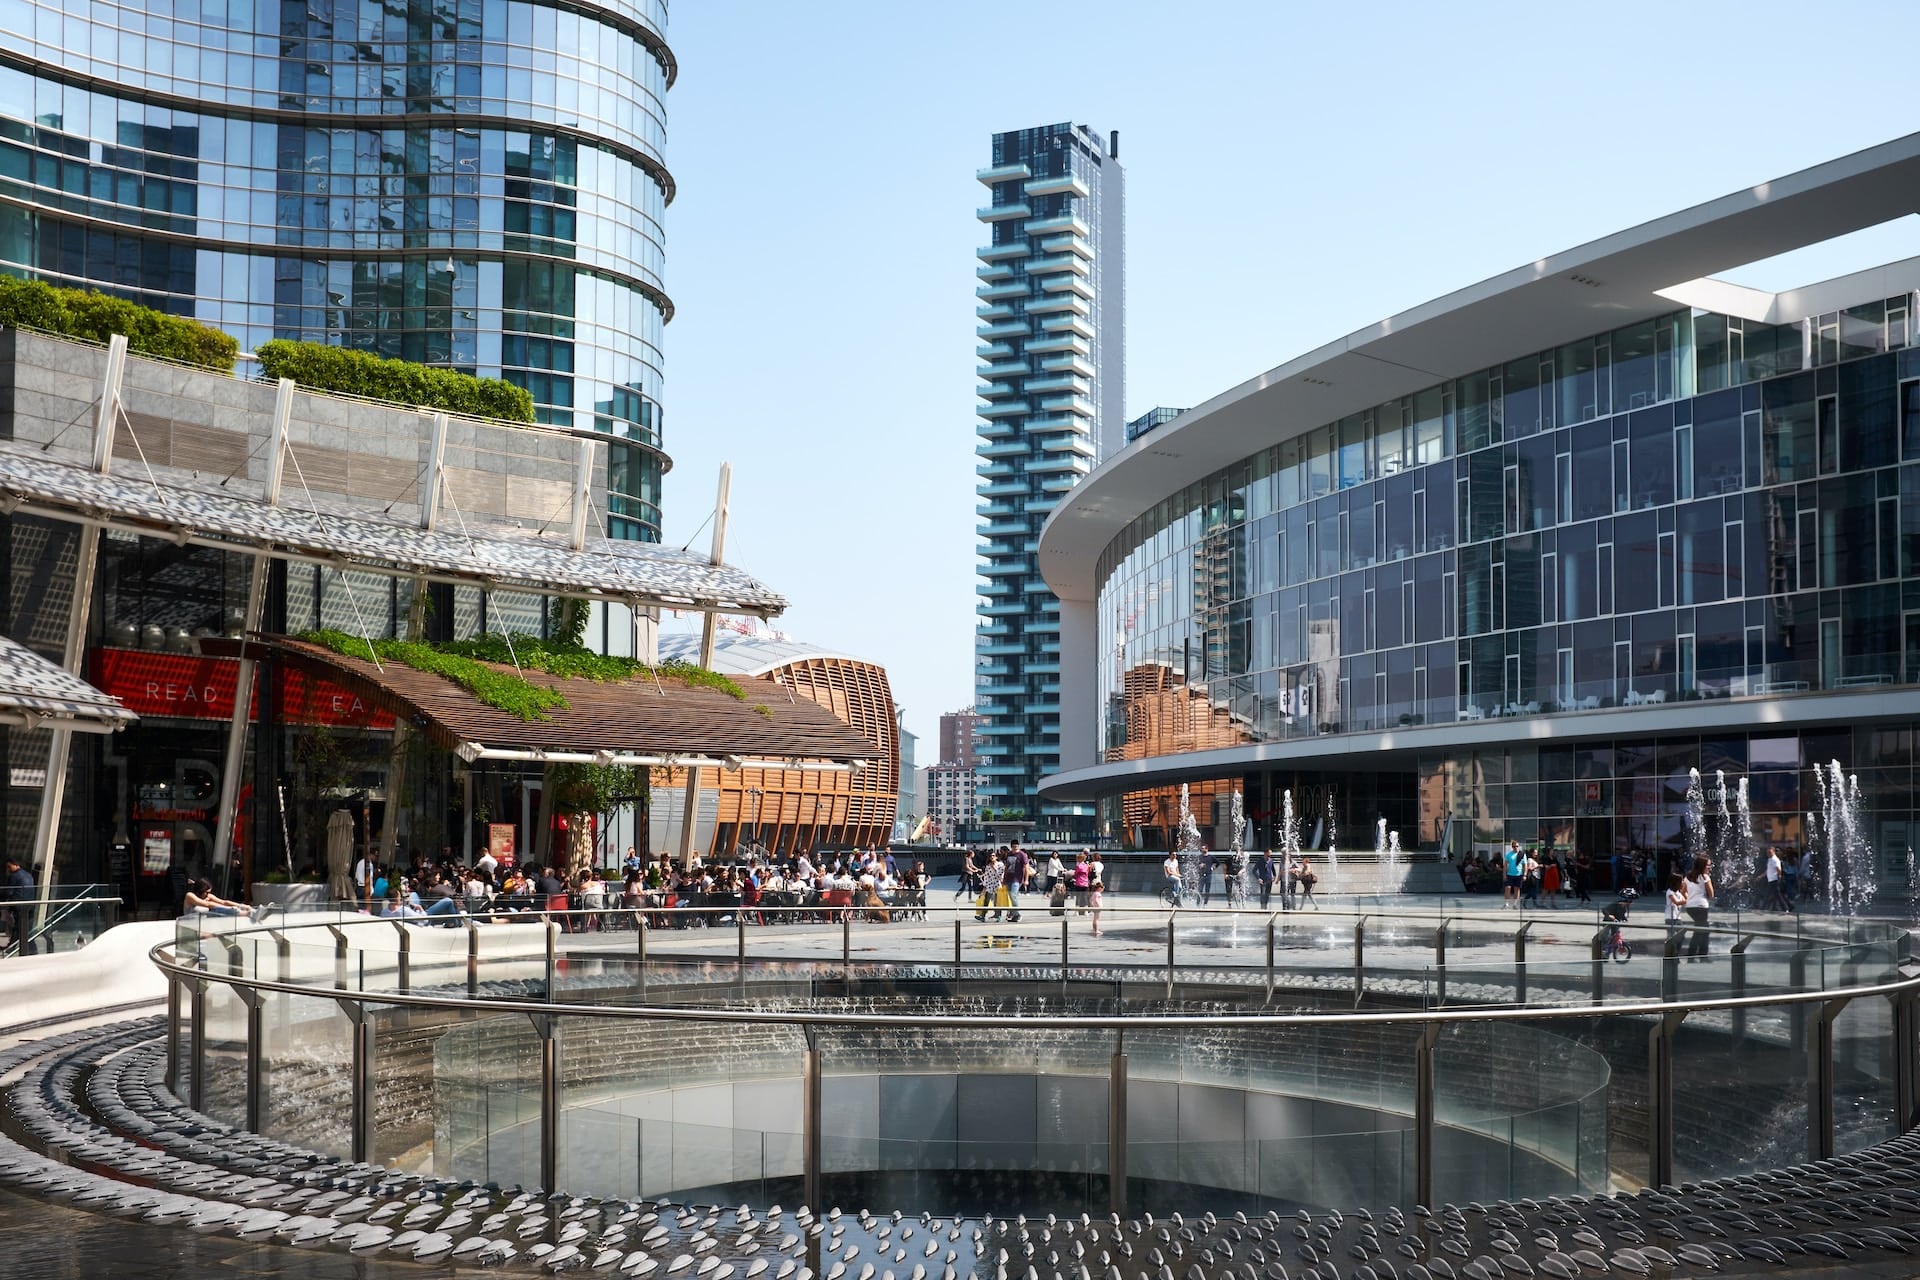 Porta Nuova is a trendy and upscale area located near the heart of Milan.